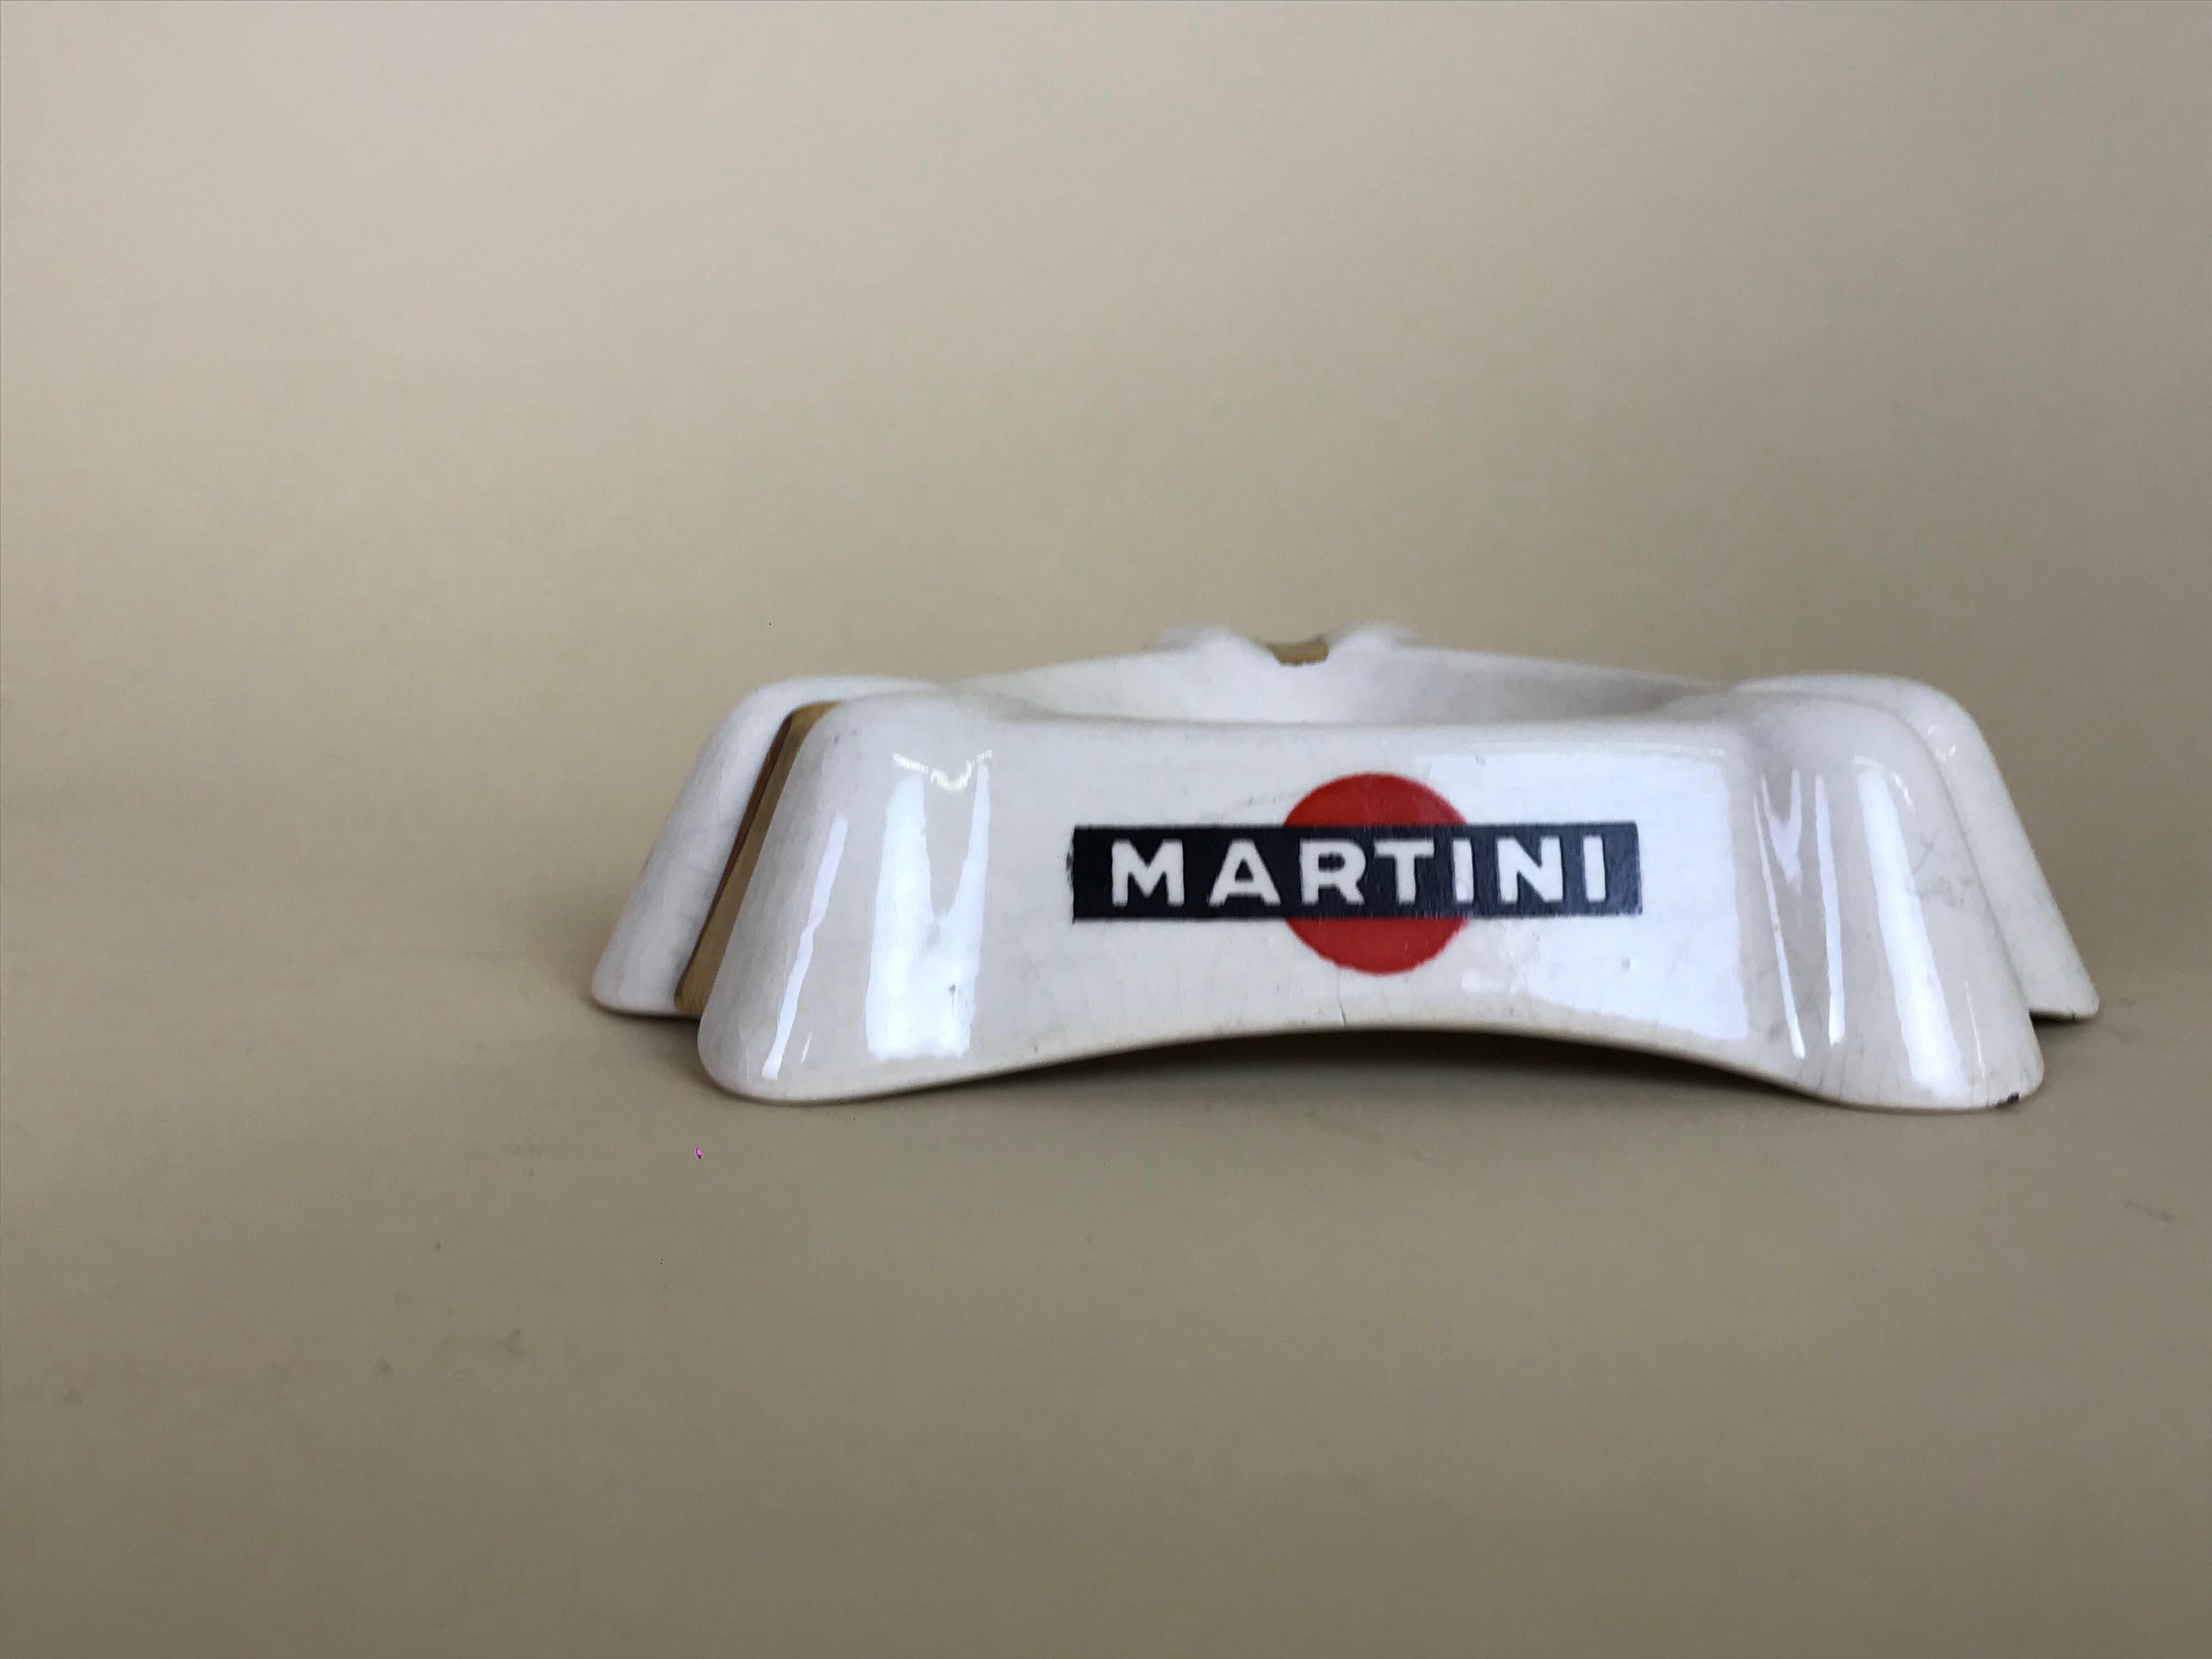 1950s French white triangular ashtray with gold details and Martini logo on all three sides, in earthenware by Luneville Faience, France.

Marked on bottom Luneville KG Made in France 63.

Collector's note:

Martini is a brand of Italian